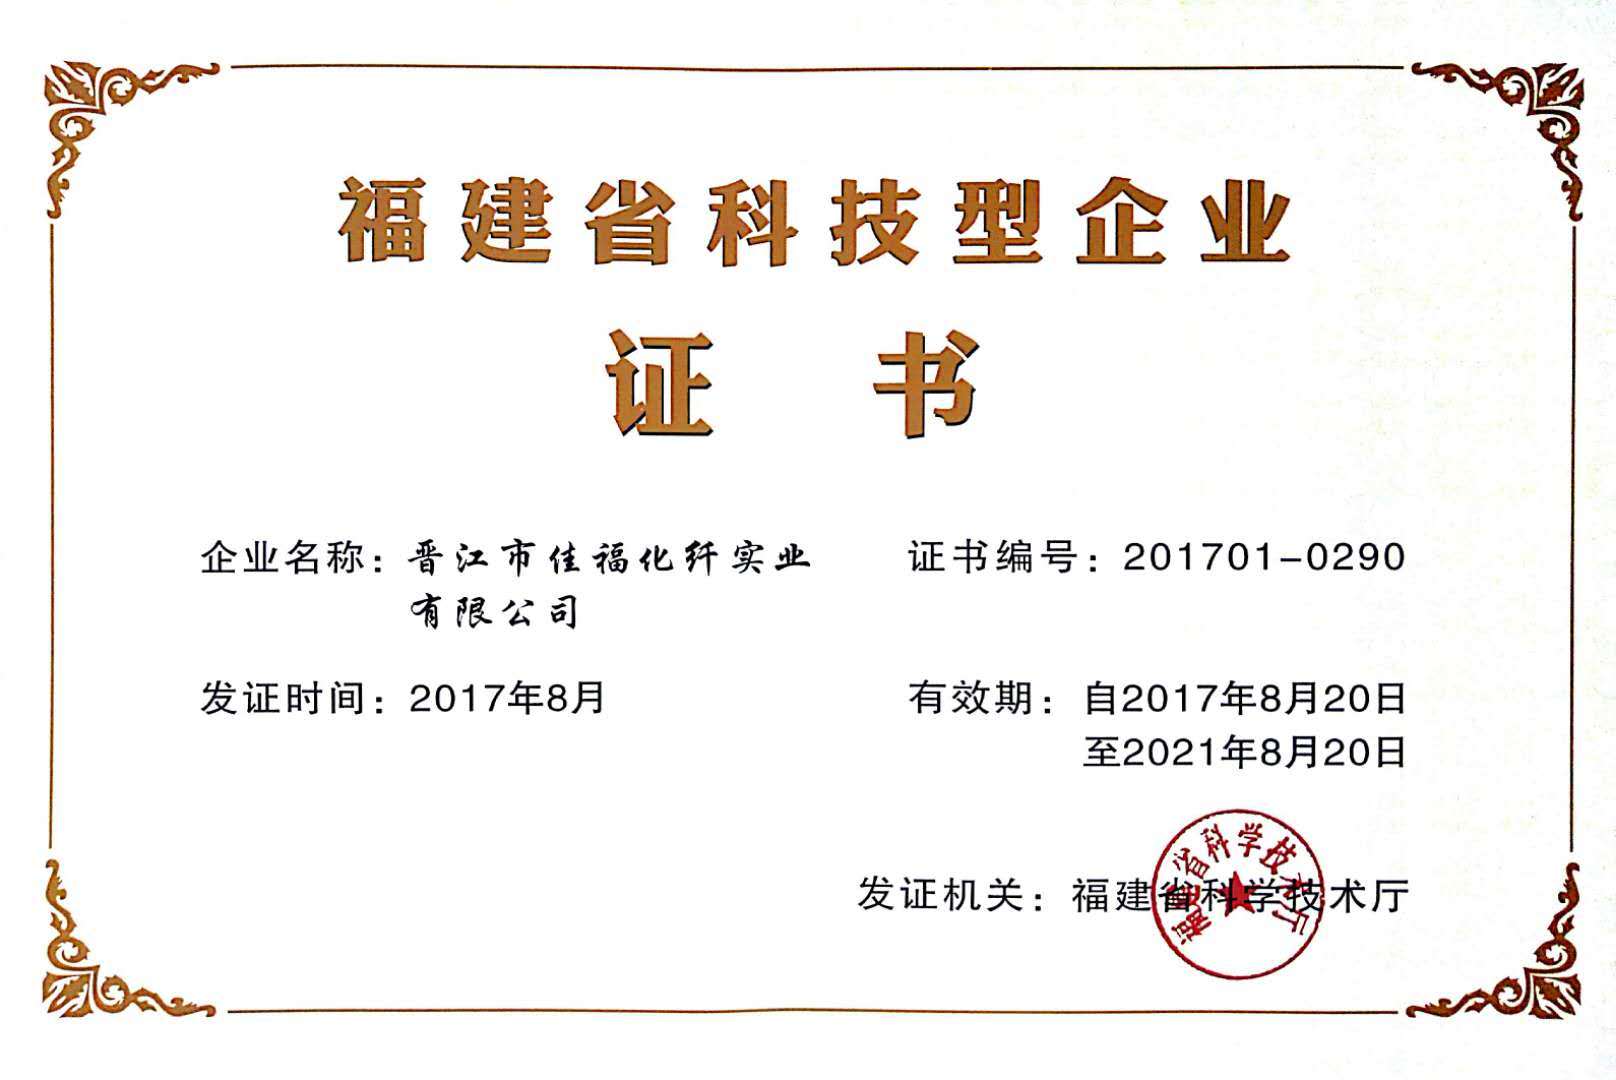 Certificate of Science and Technology Enterprise of Fujian Province